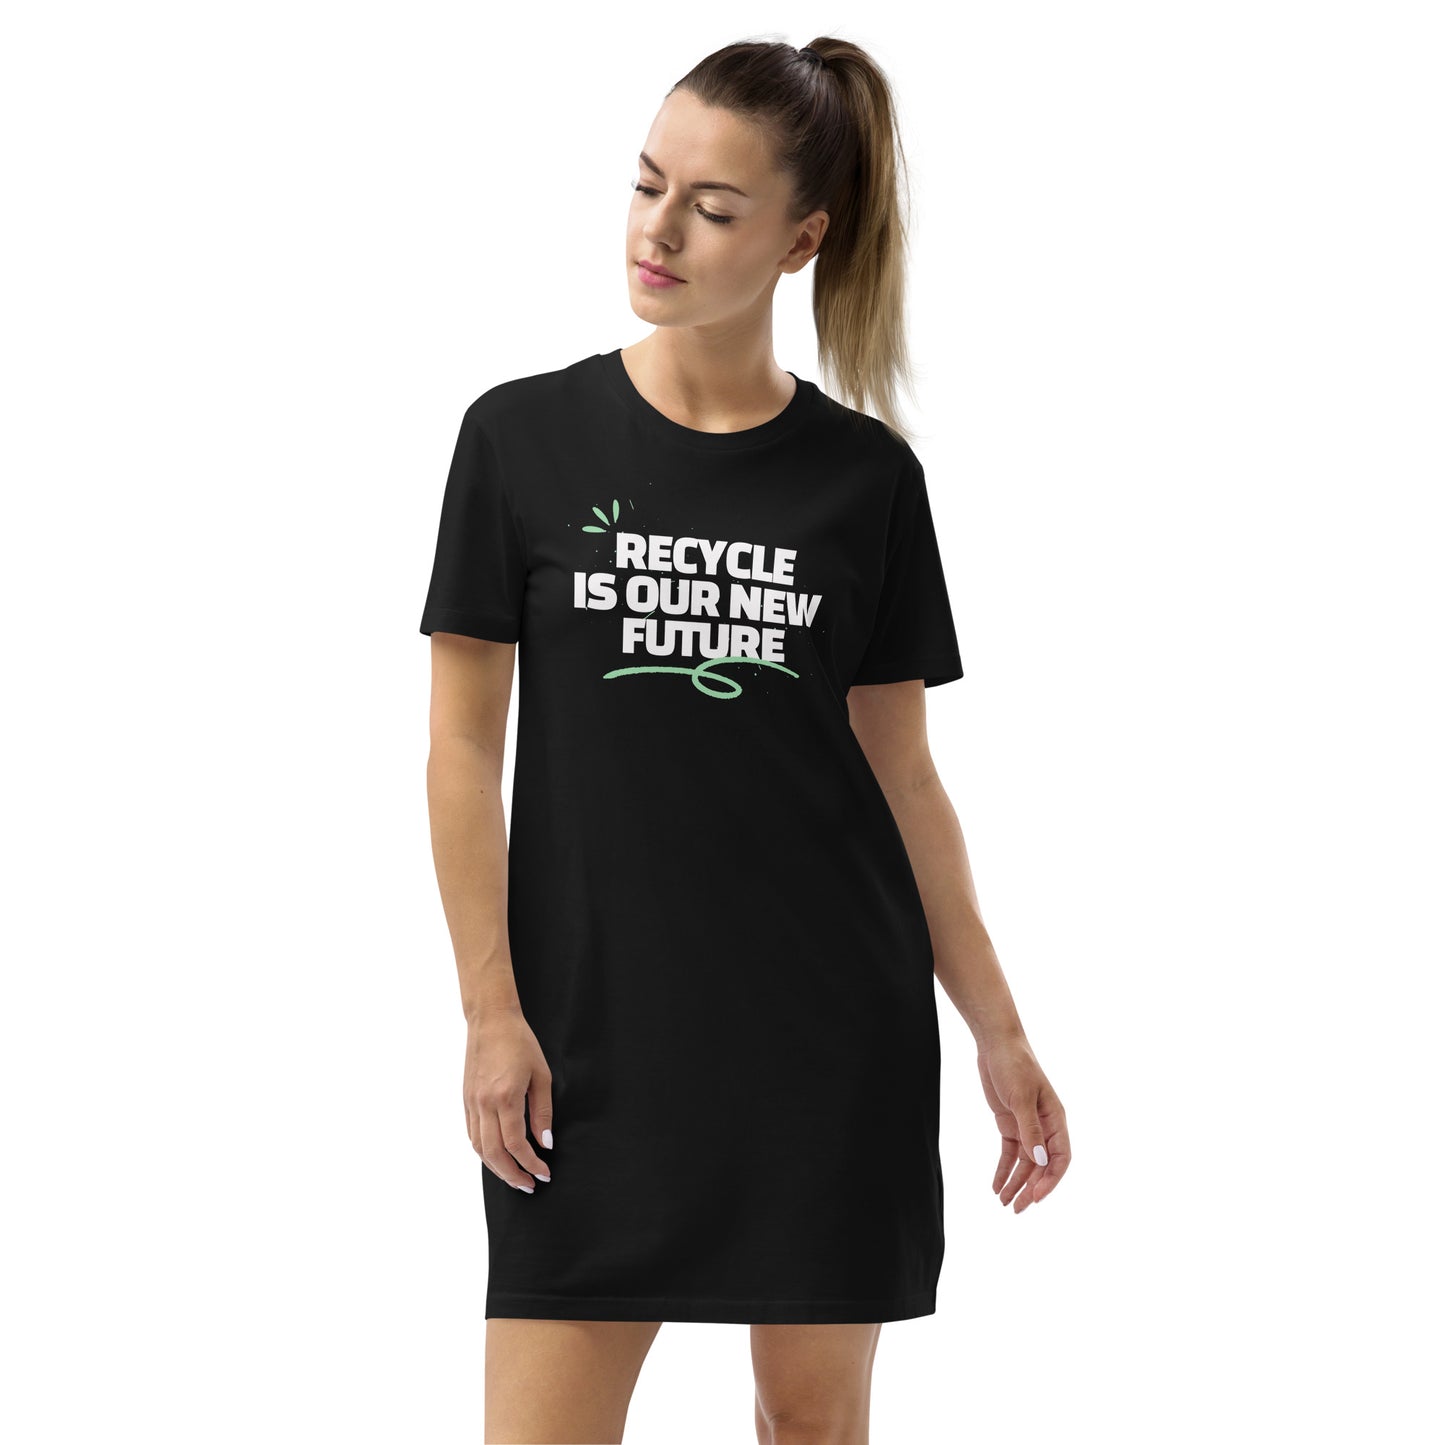 Recycle is our new future life t-shirt dress